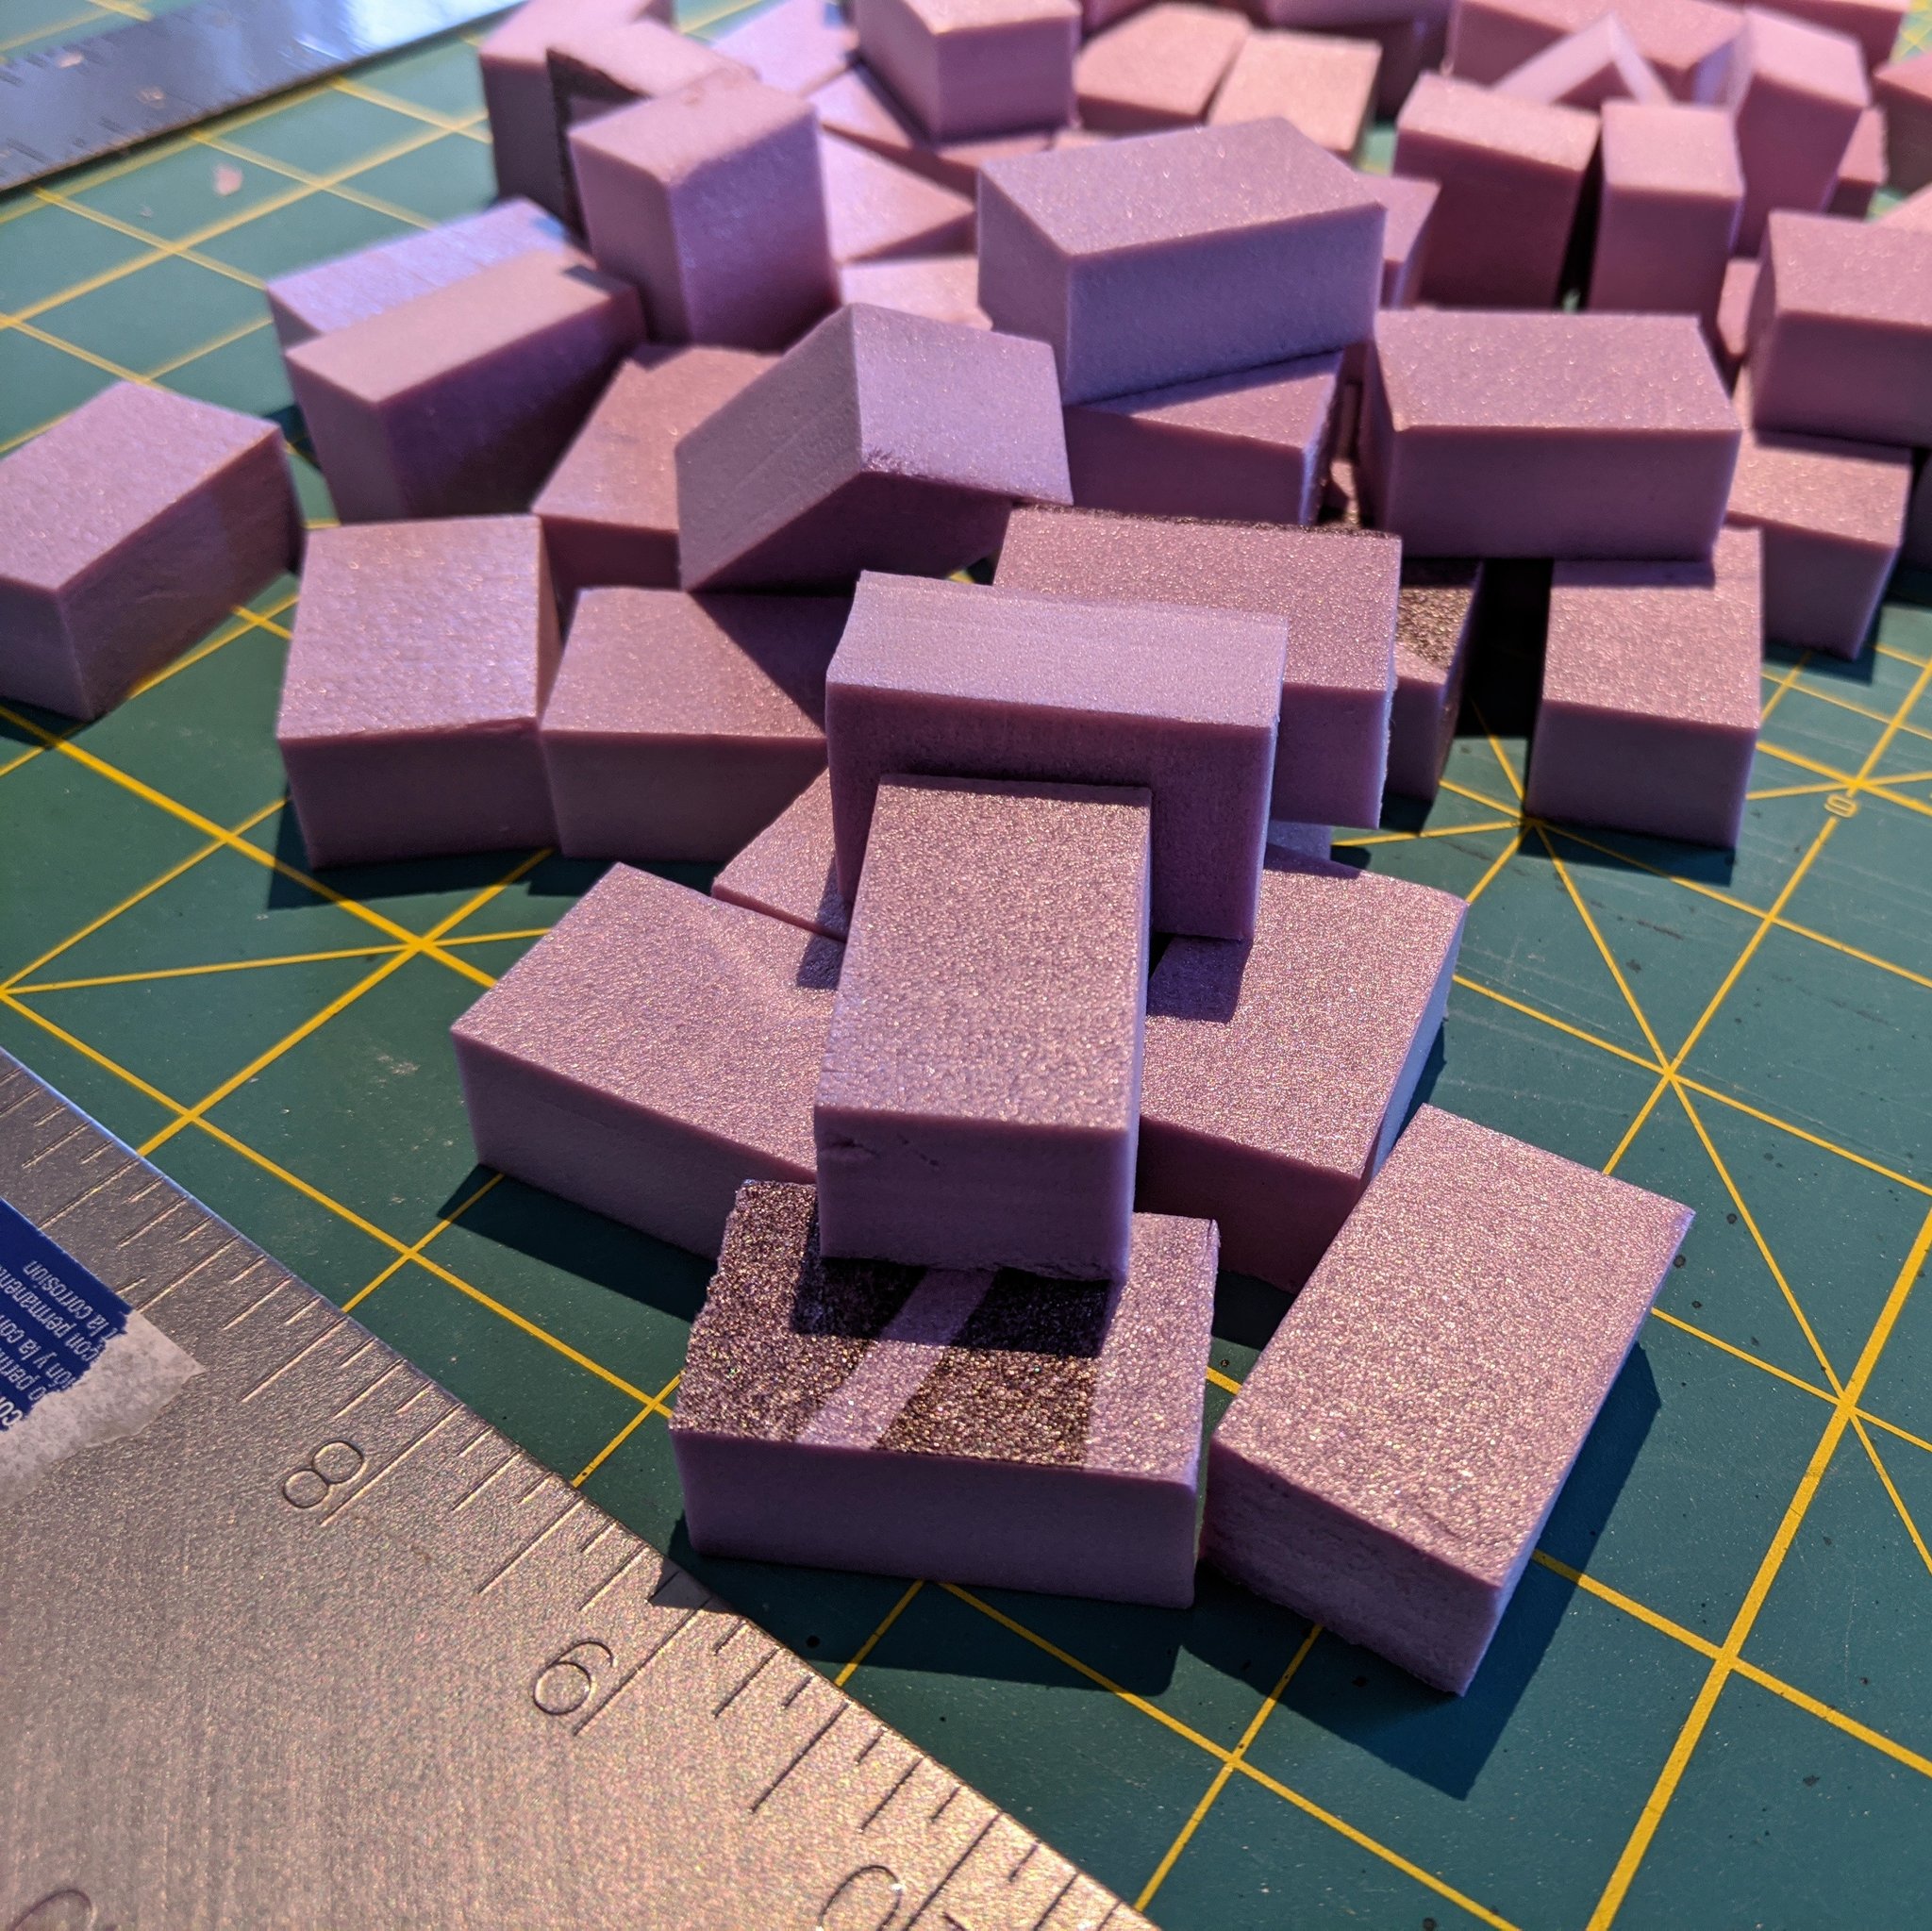 thedorklair on Instagram در X: «I started by cutting XPS foam into brick  shapes... 2/6 https://t.co/8UmNvEv6et» / X